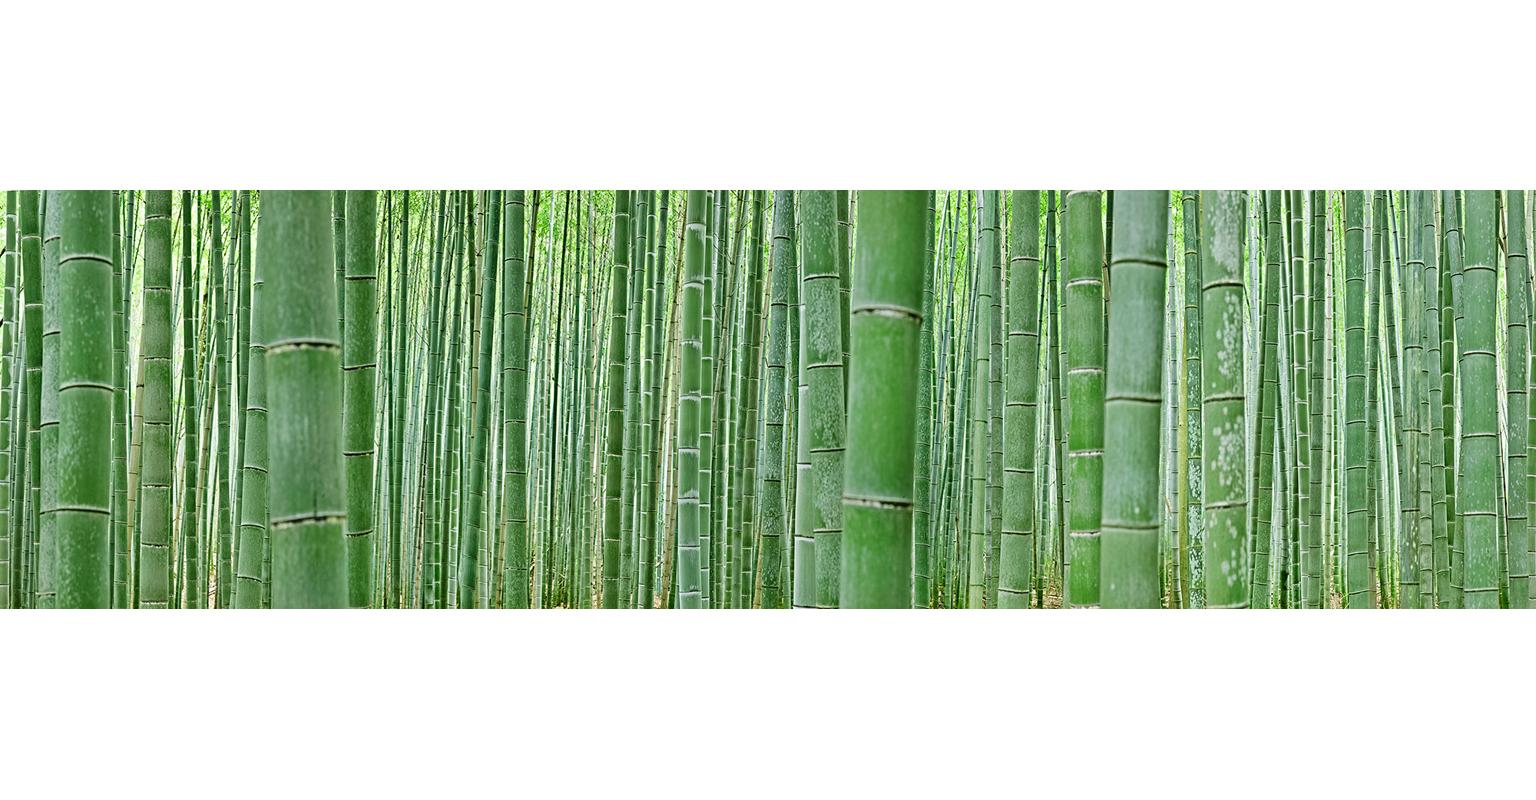 Bamboo Forest - abstract nature observation of iconic Japanese bamboo grove